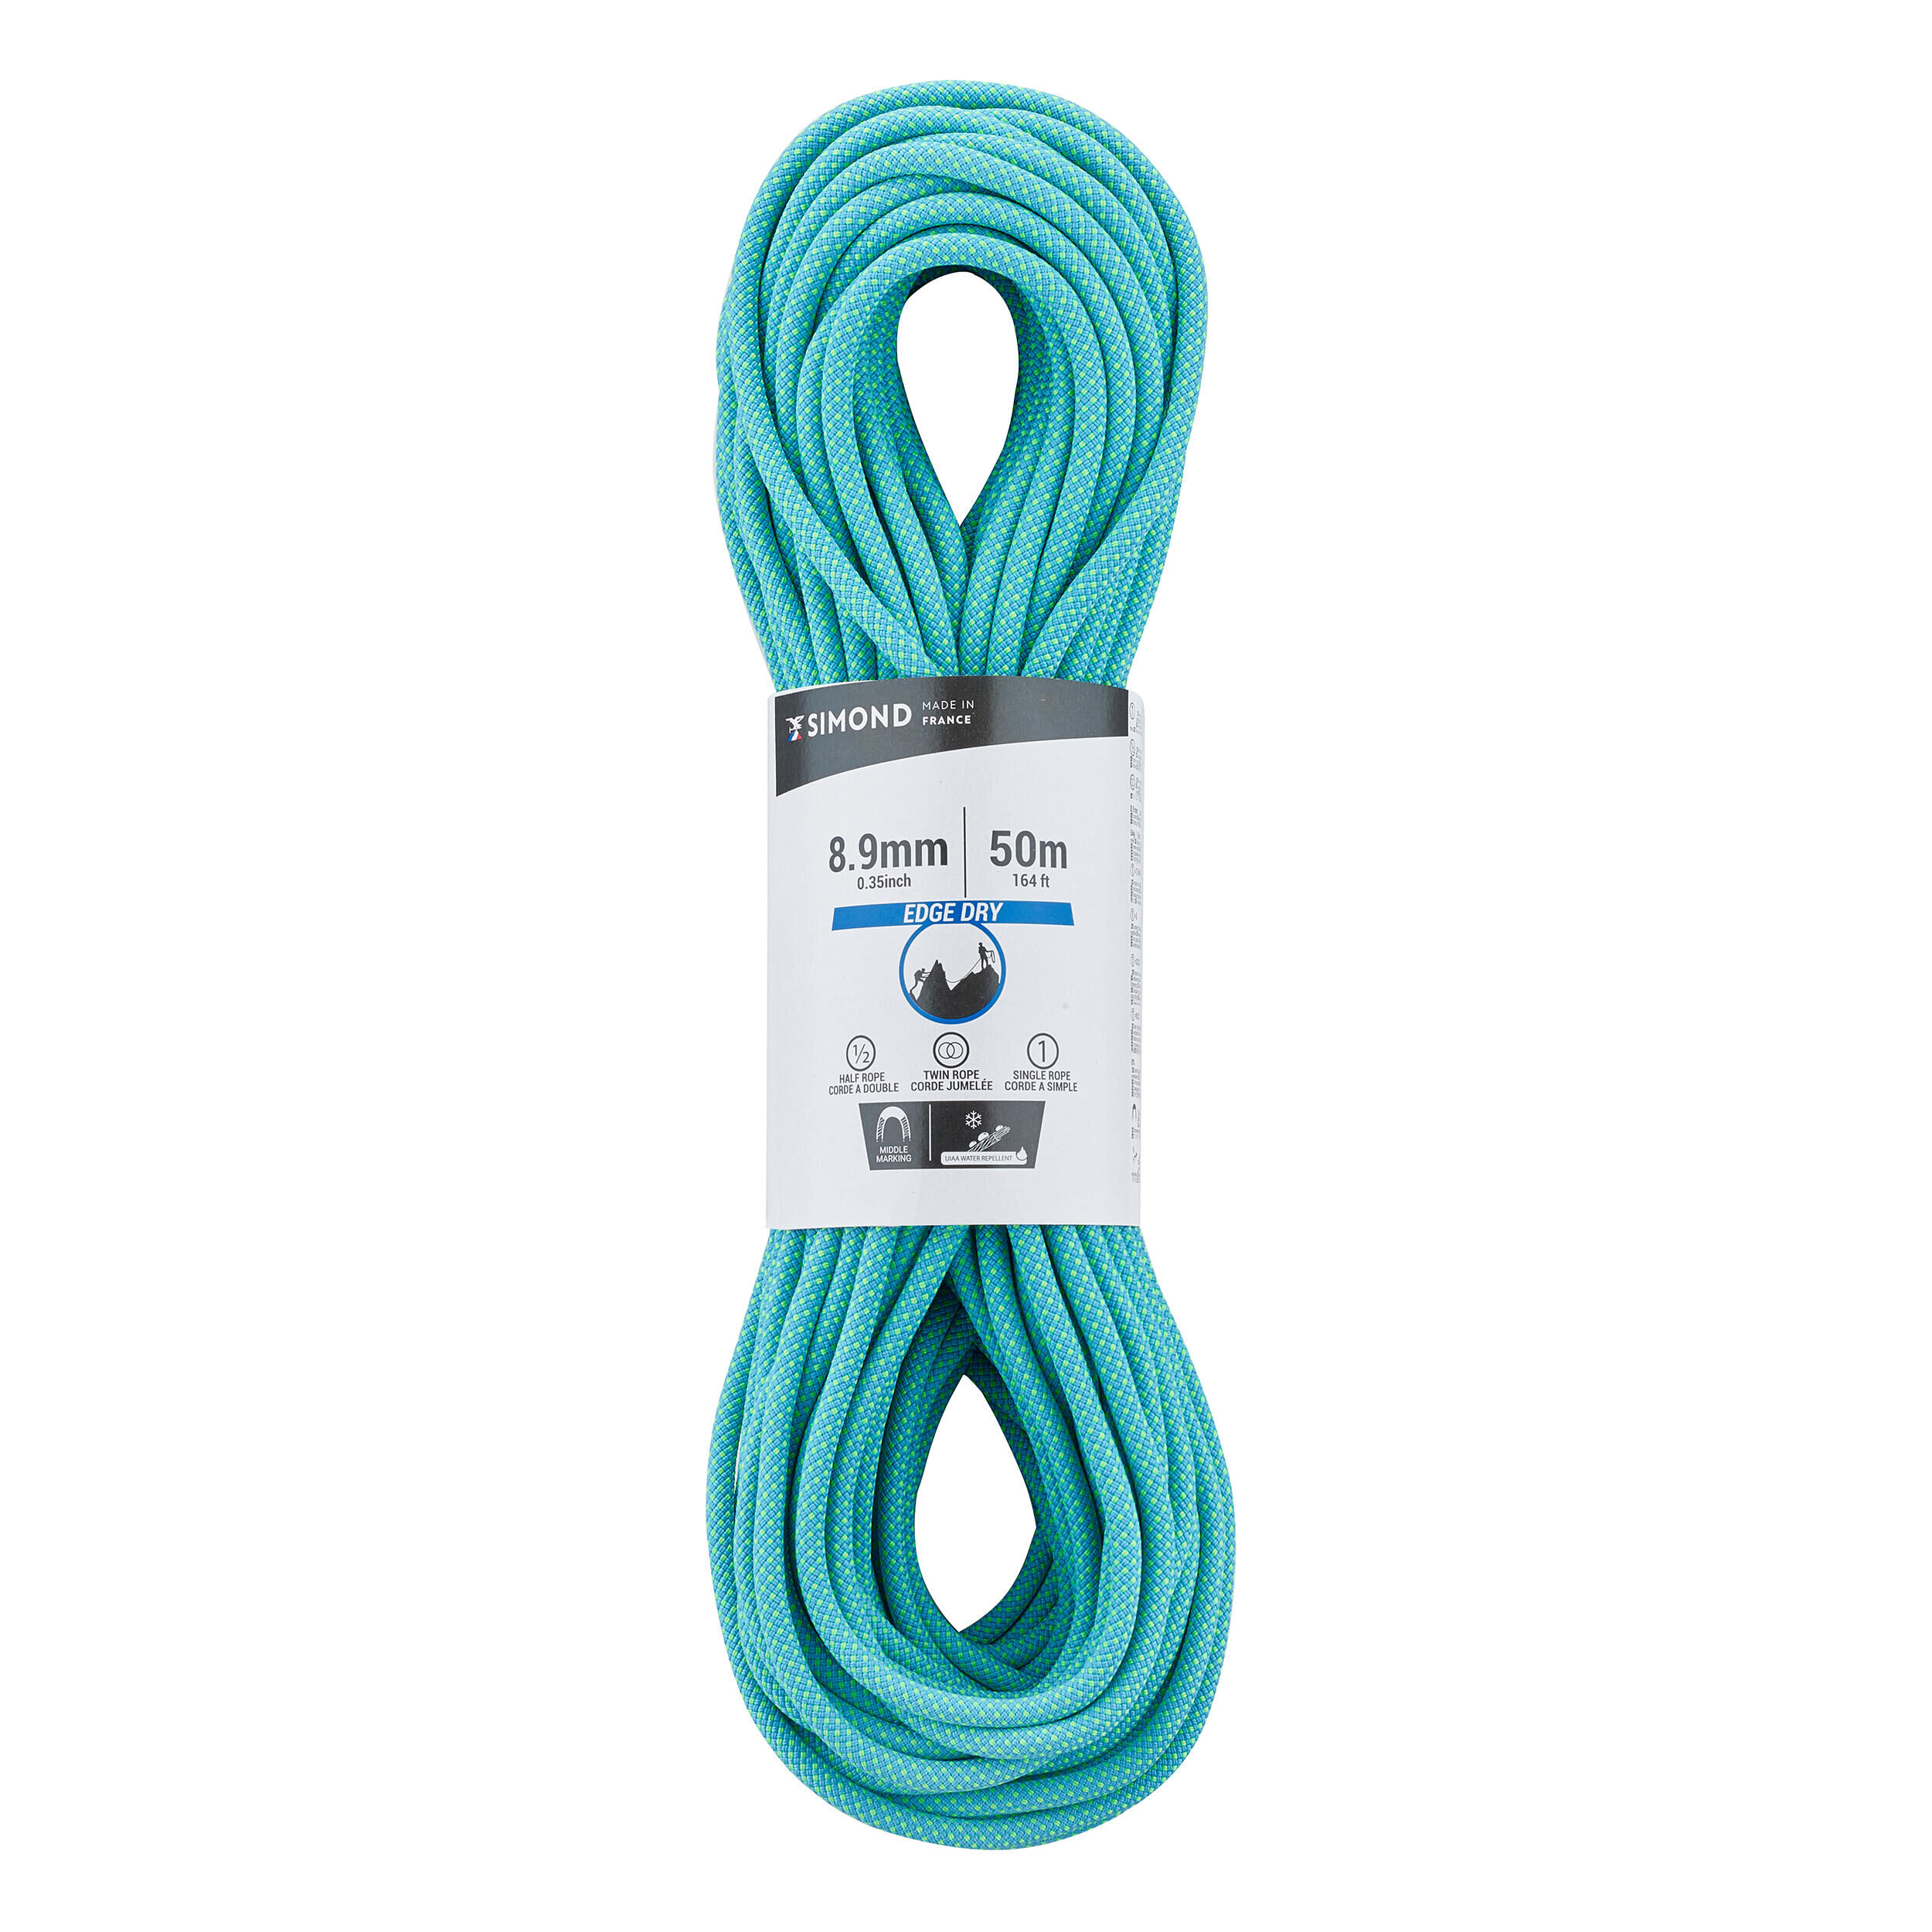 SIMOND CLIMBING AND MOUNTAINEERING TRIPLE ROPE STANDARD 8.9 mm x 50 m - EDGE DRY TURQUOISE